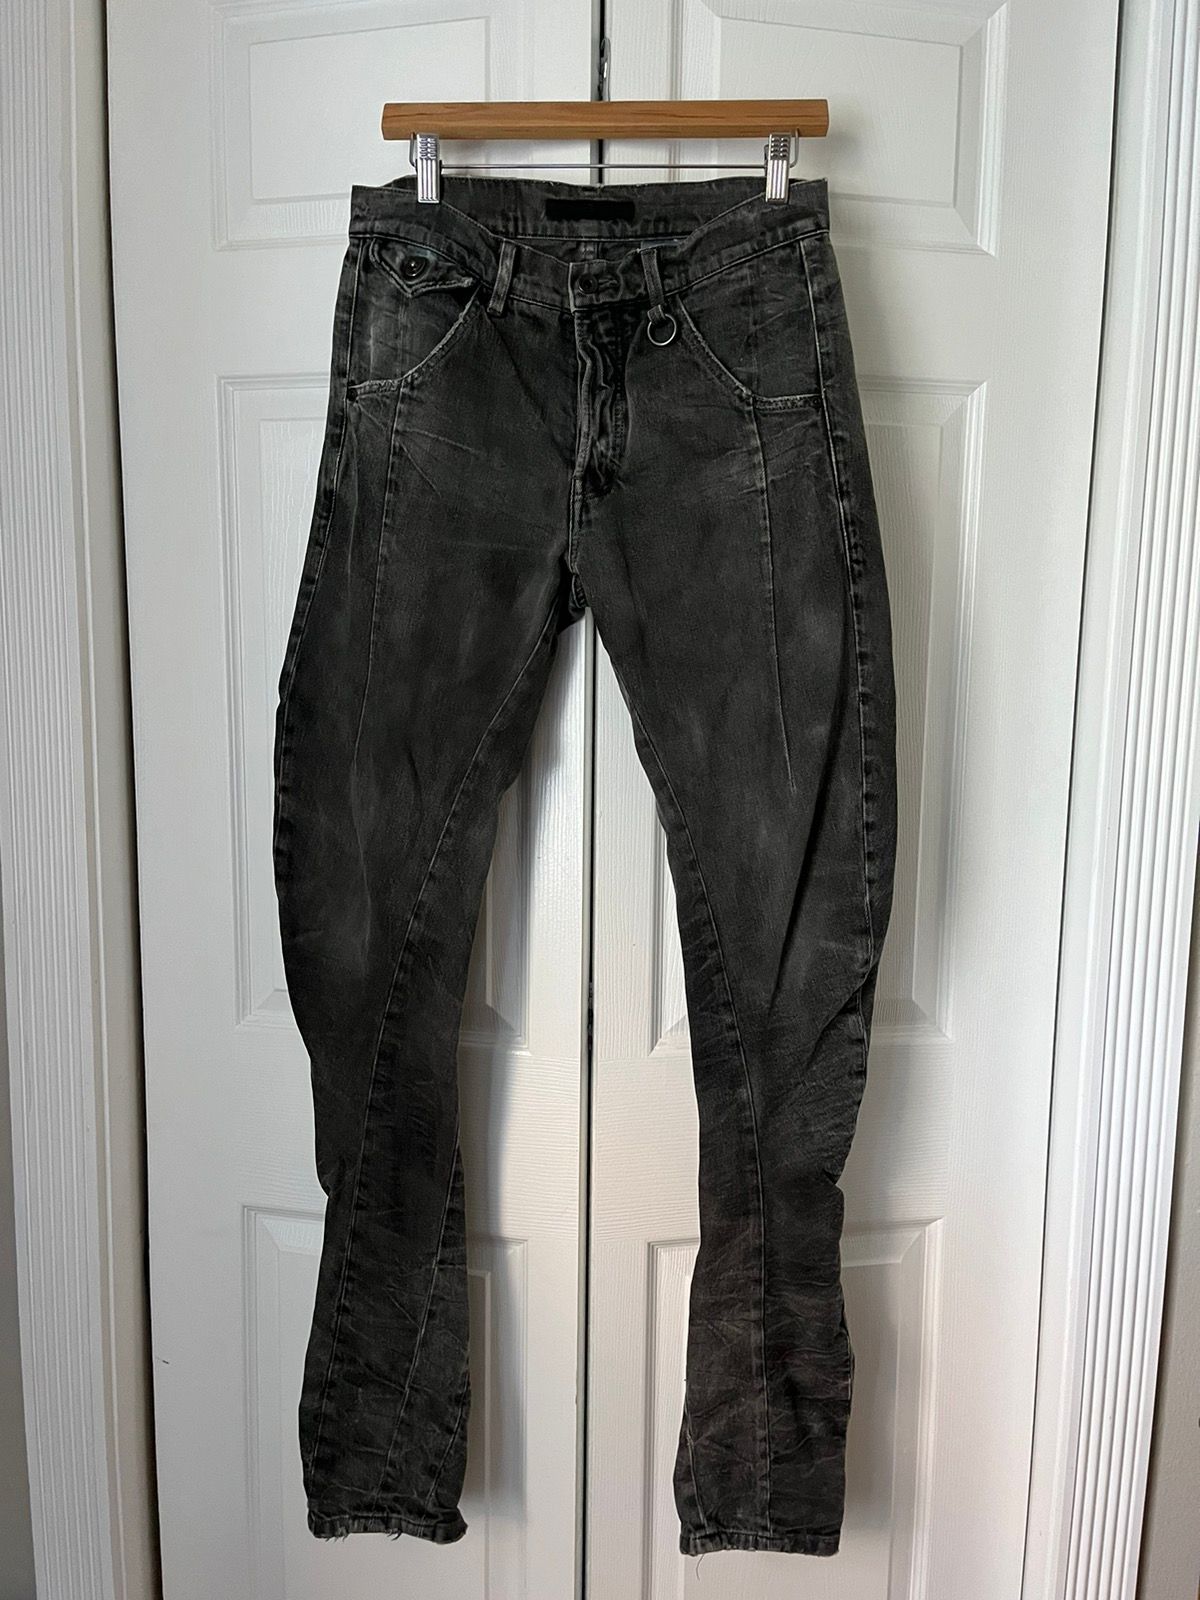 Pre-owned Julius Archive Aw11 Halo Twisted Spiral Seam Distressed Denim Jeans In Charcoal Grey